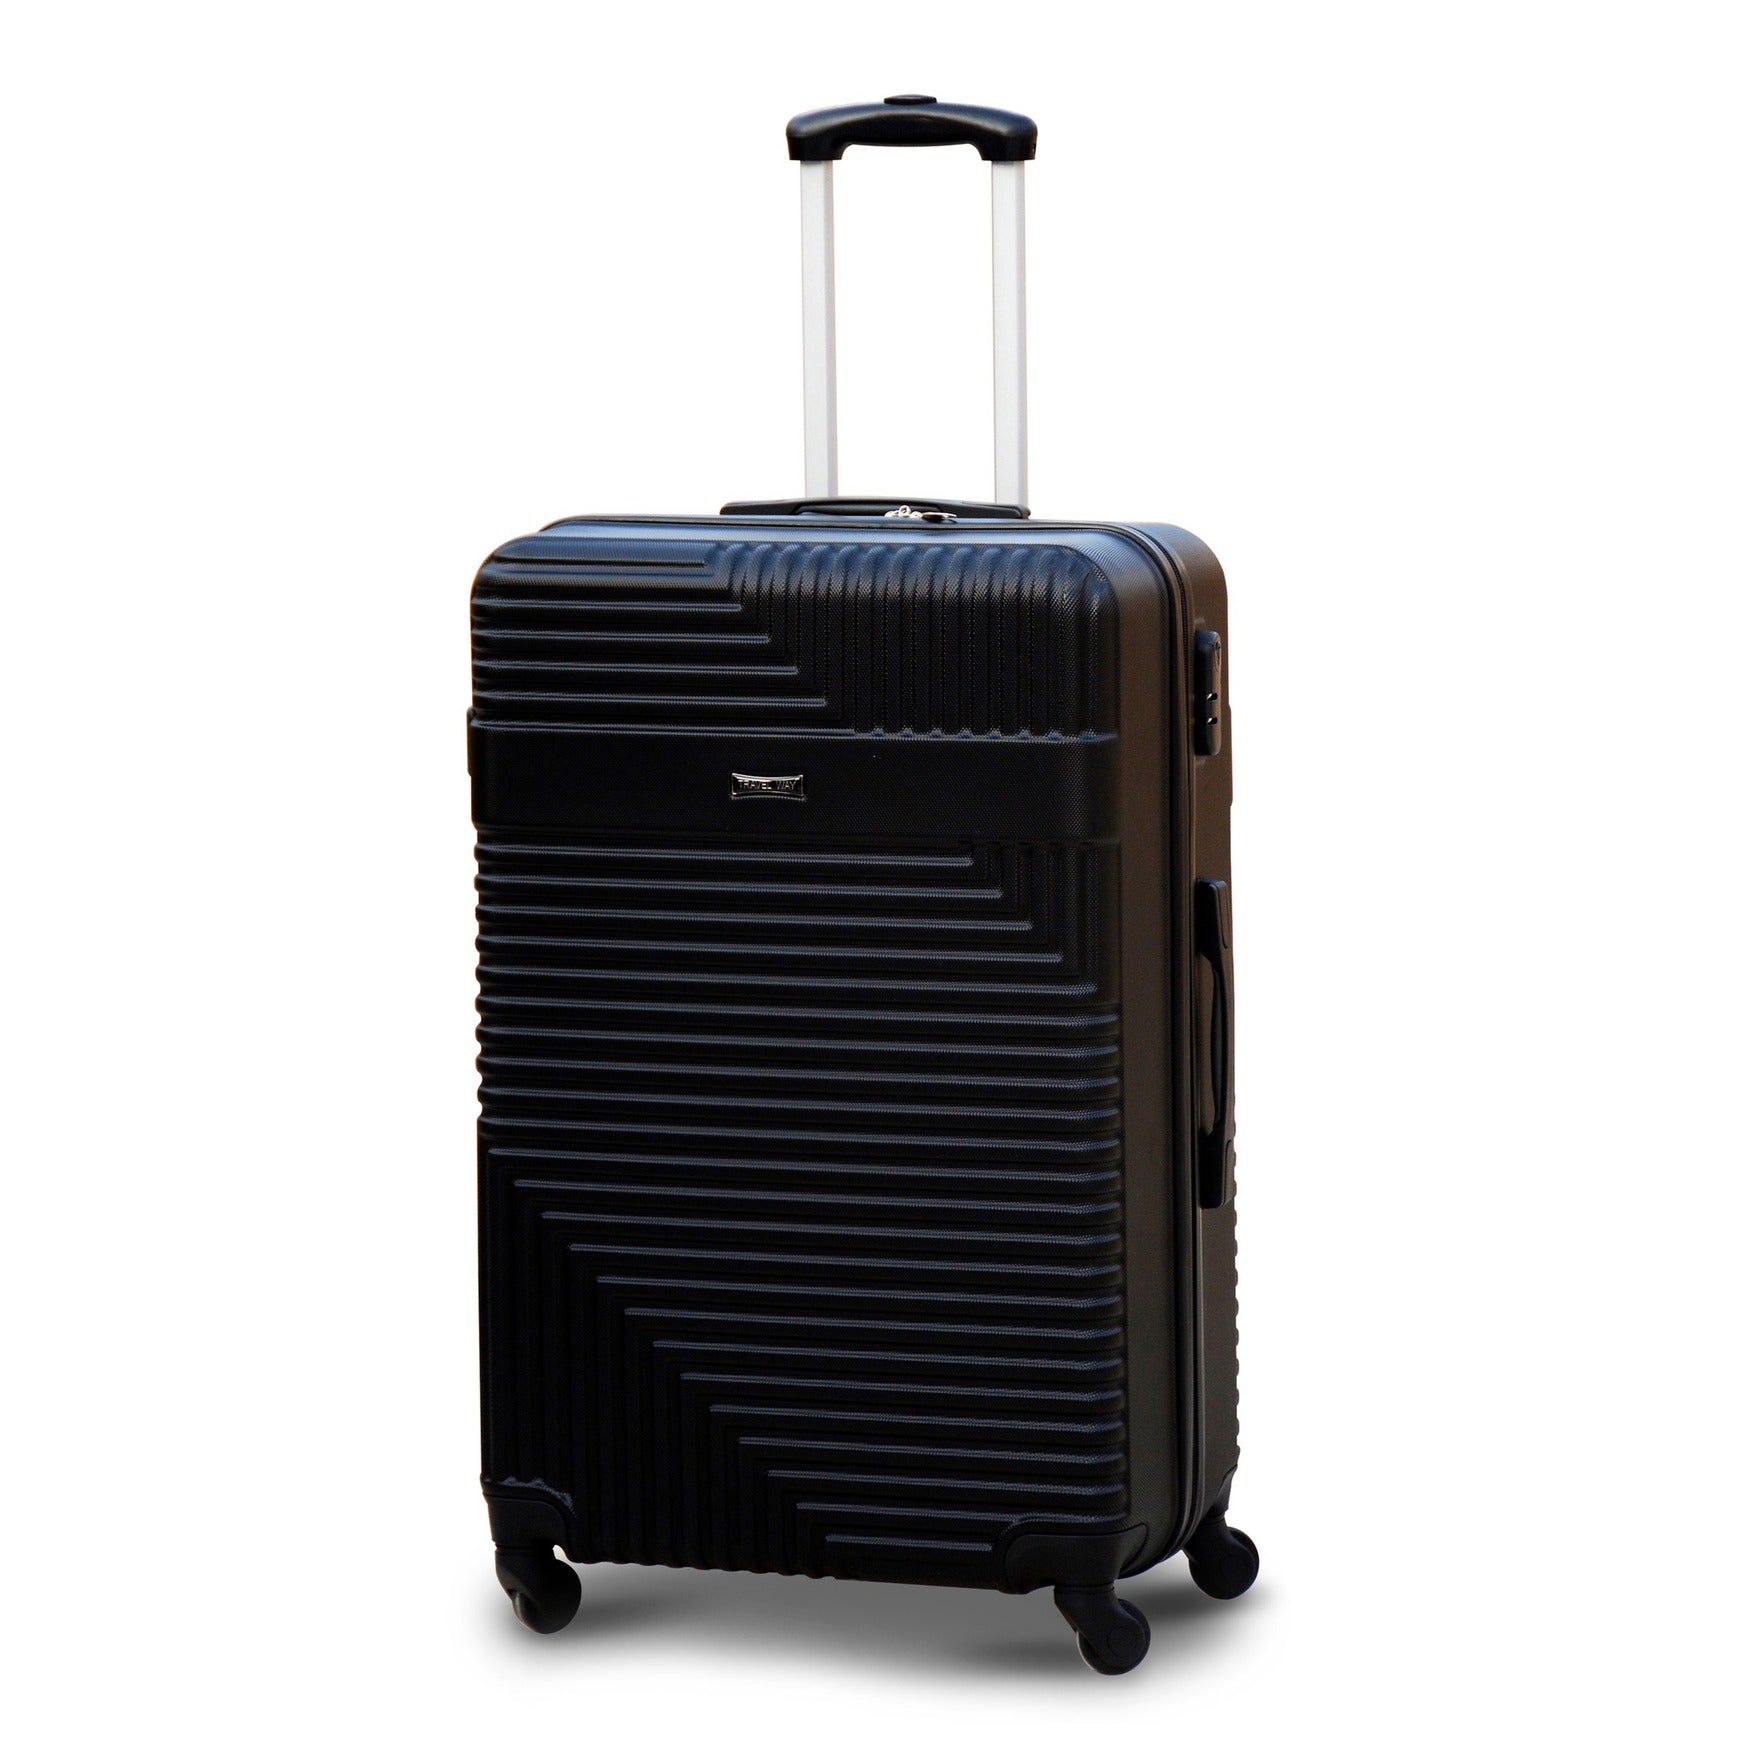 28" Black Travel Way ABS Lightweight Luggage Bag With Spinner Wheel